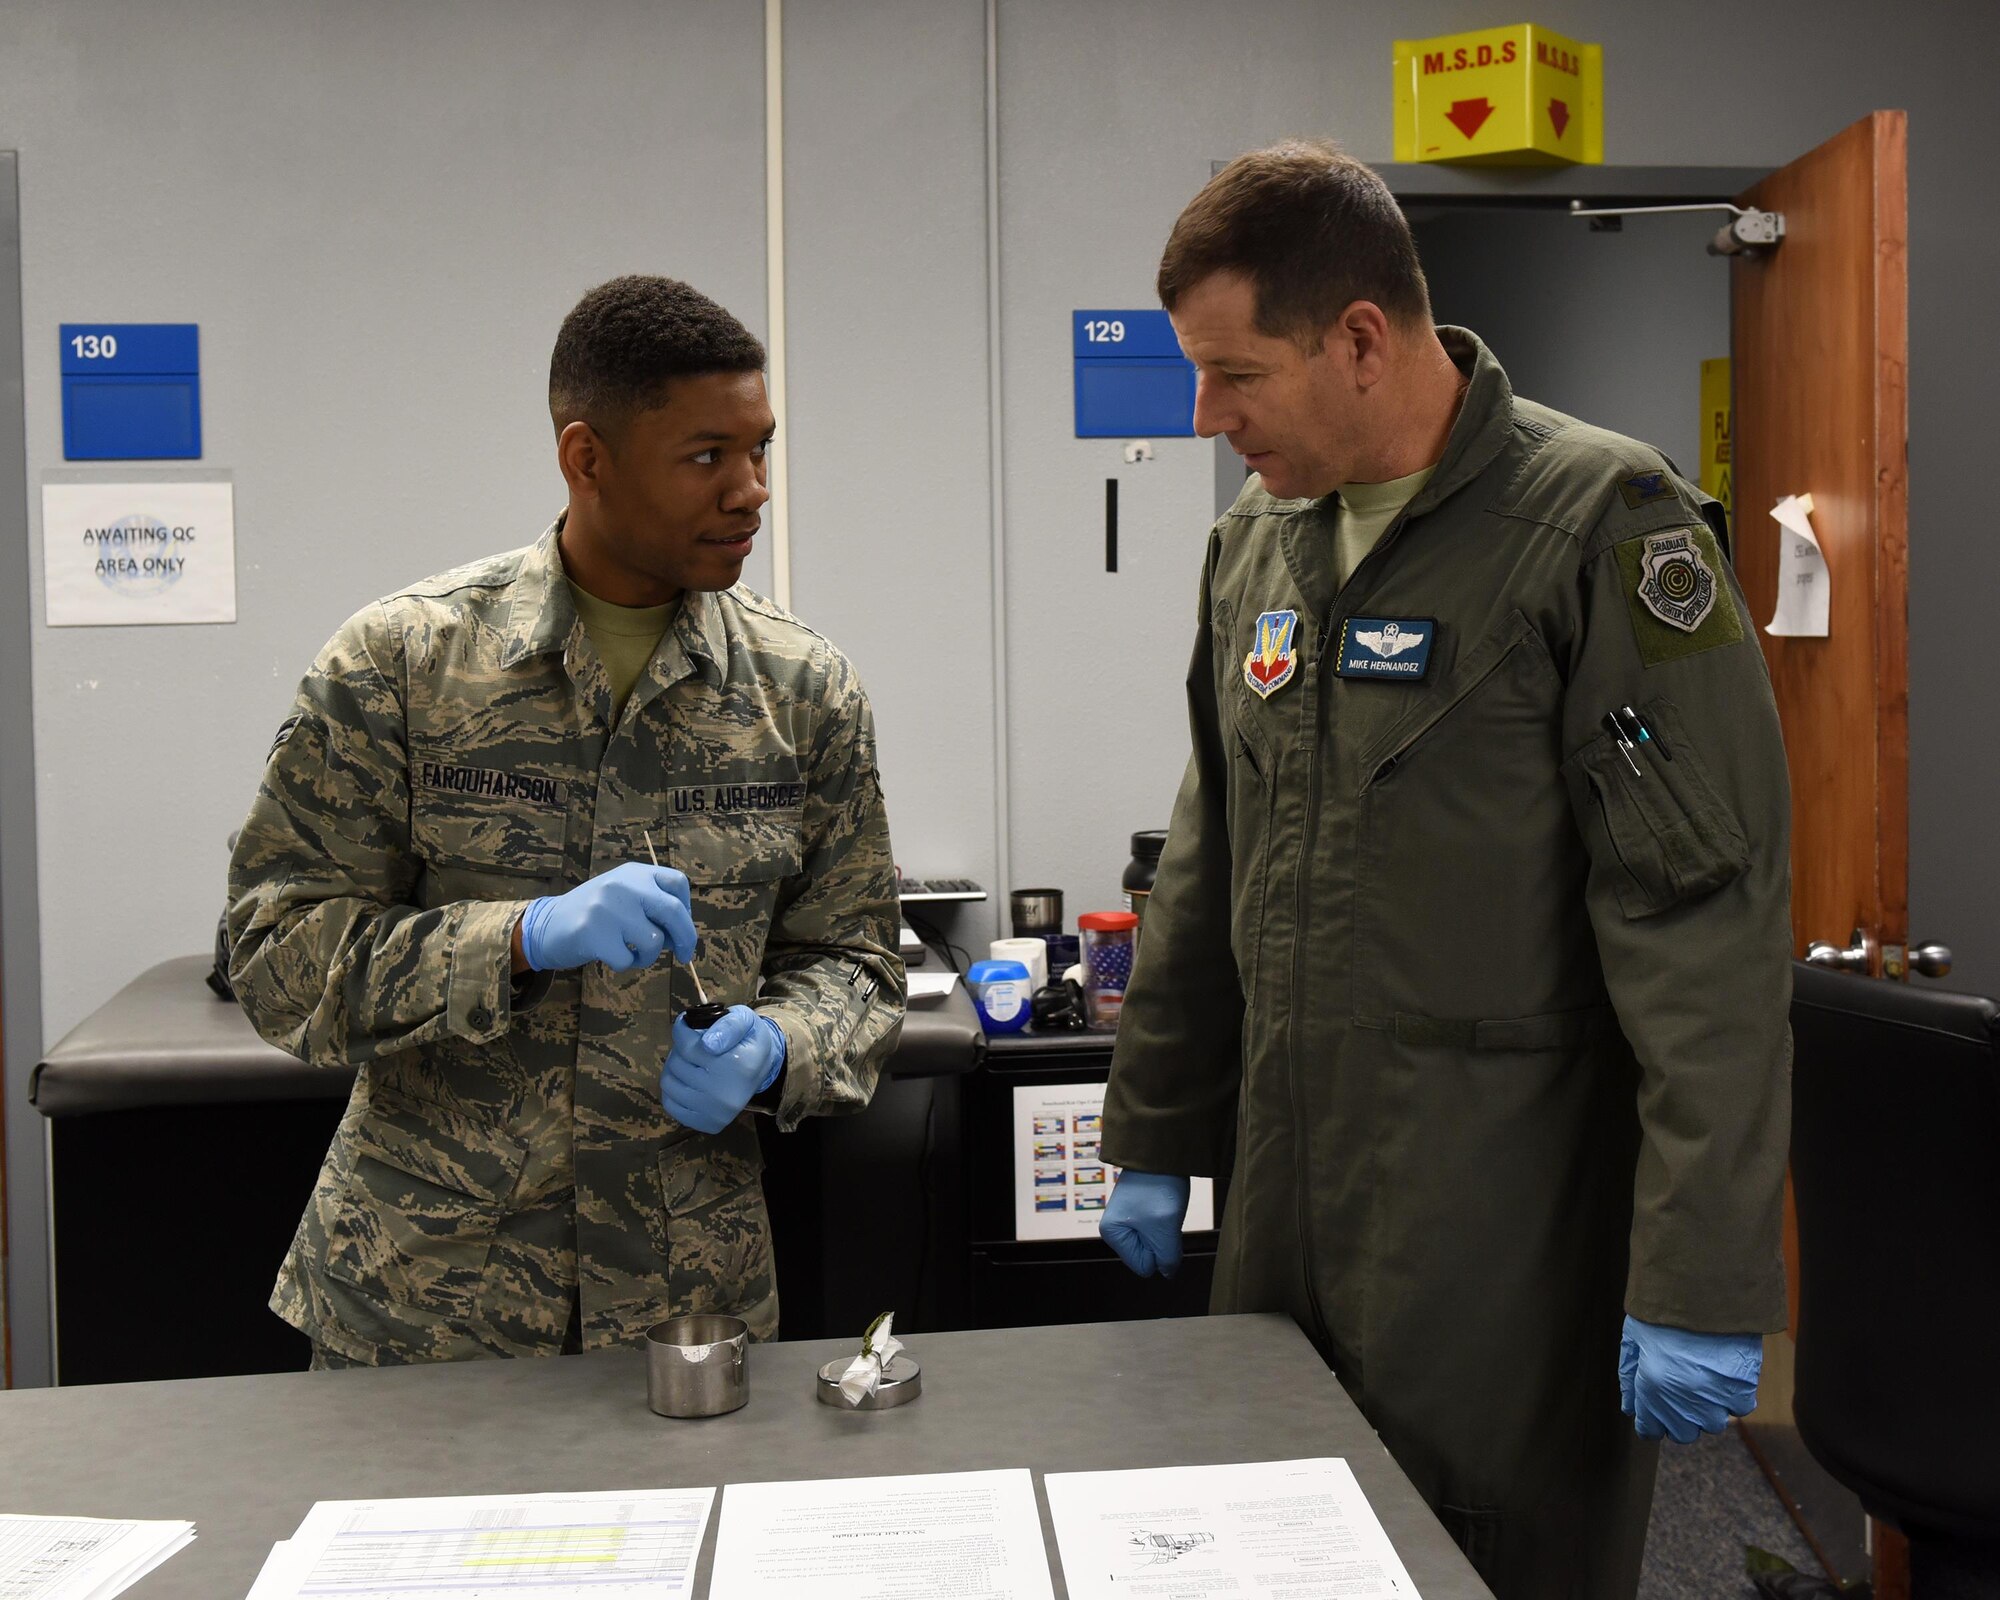 U.S. Air Force Airman 1st Class Donvin Farquharson, 325th Operations Support Group aircrew flight equipment technician, teaches Col. Michael Hernandez, 325th Fighter Wing commander, how to properly inspect and maintain aircrew flight equipment at Tyndall Air Force Base, Fla., Feb. 1, 2017. Farquharson was chosen to be shadowed by the base commander as a way for the commander to get in touch with Airmen and understand their daily jobs and the challenges they may face. (U.S. Air Force photo by Airman 1st Class Cody R. Miller/Released)